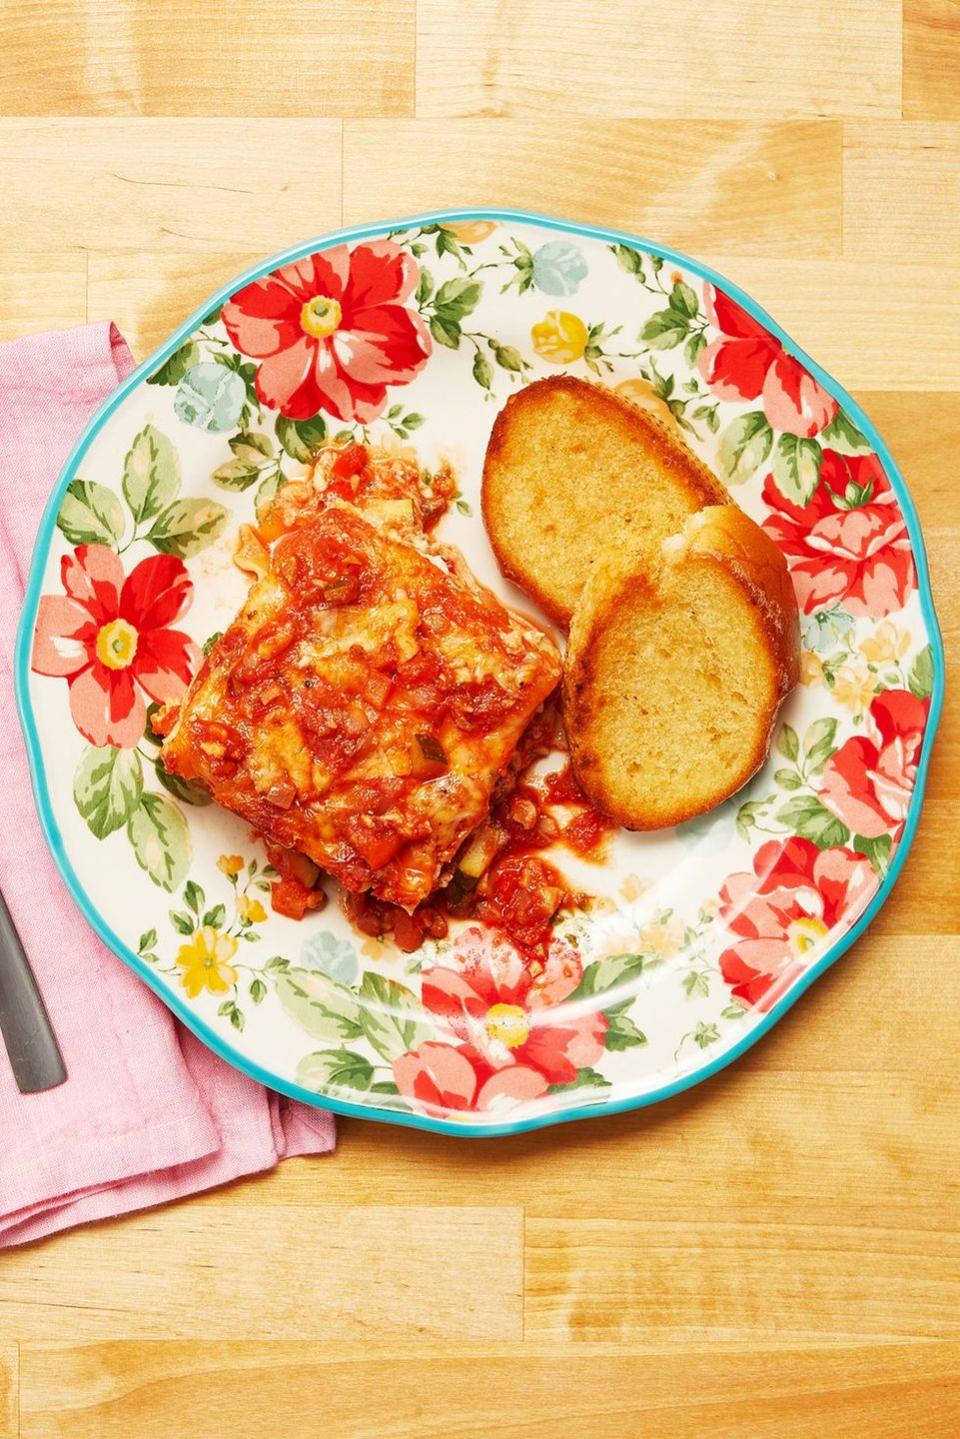 vegetable lasagna slice on floral plate with bread